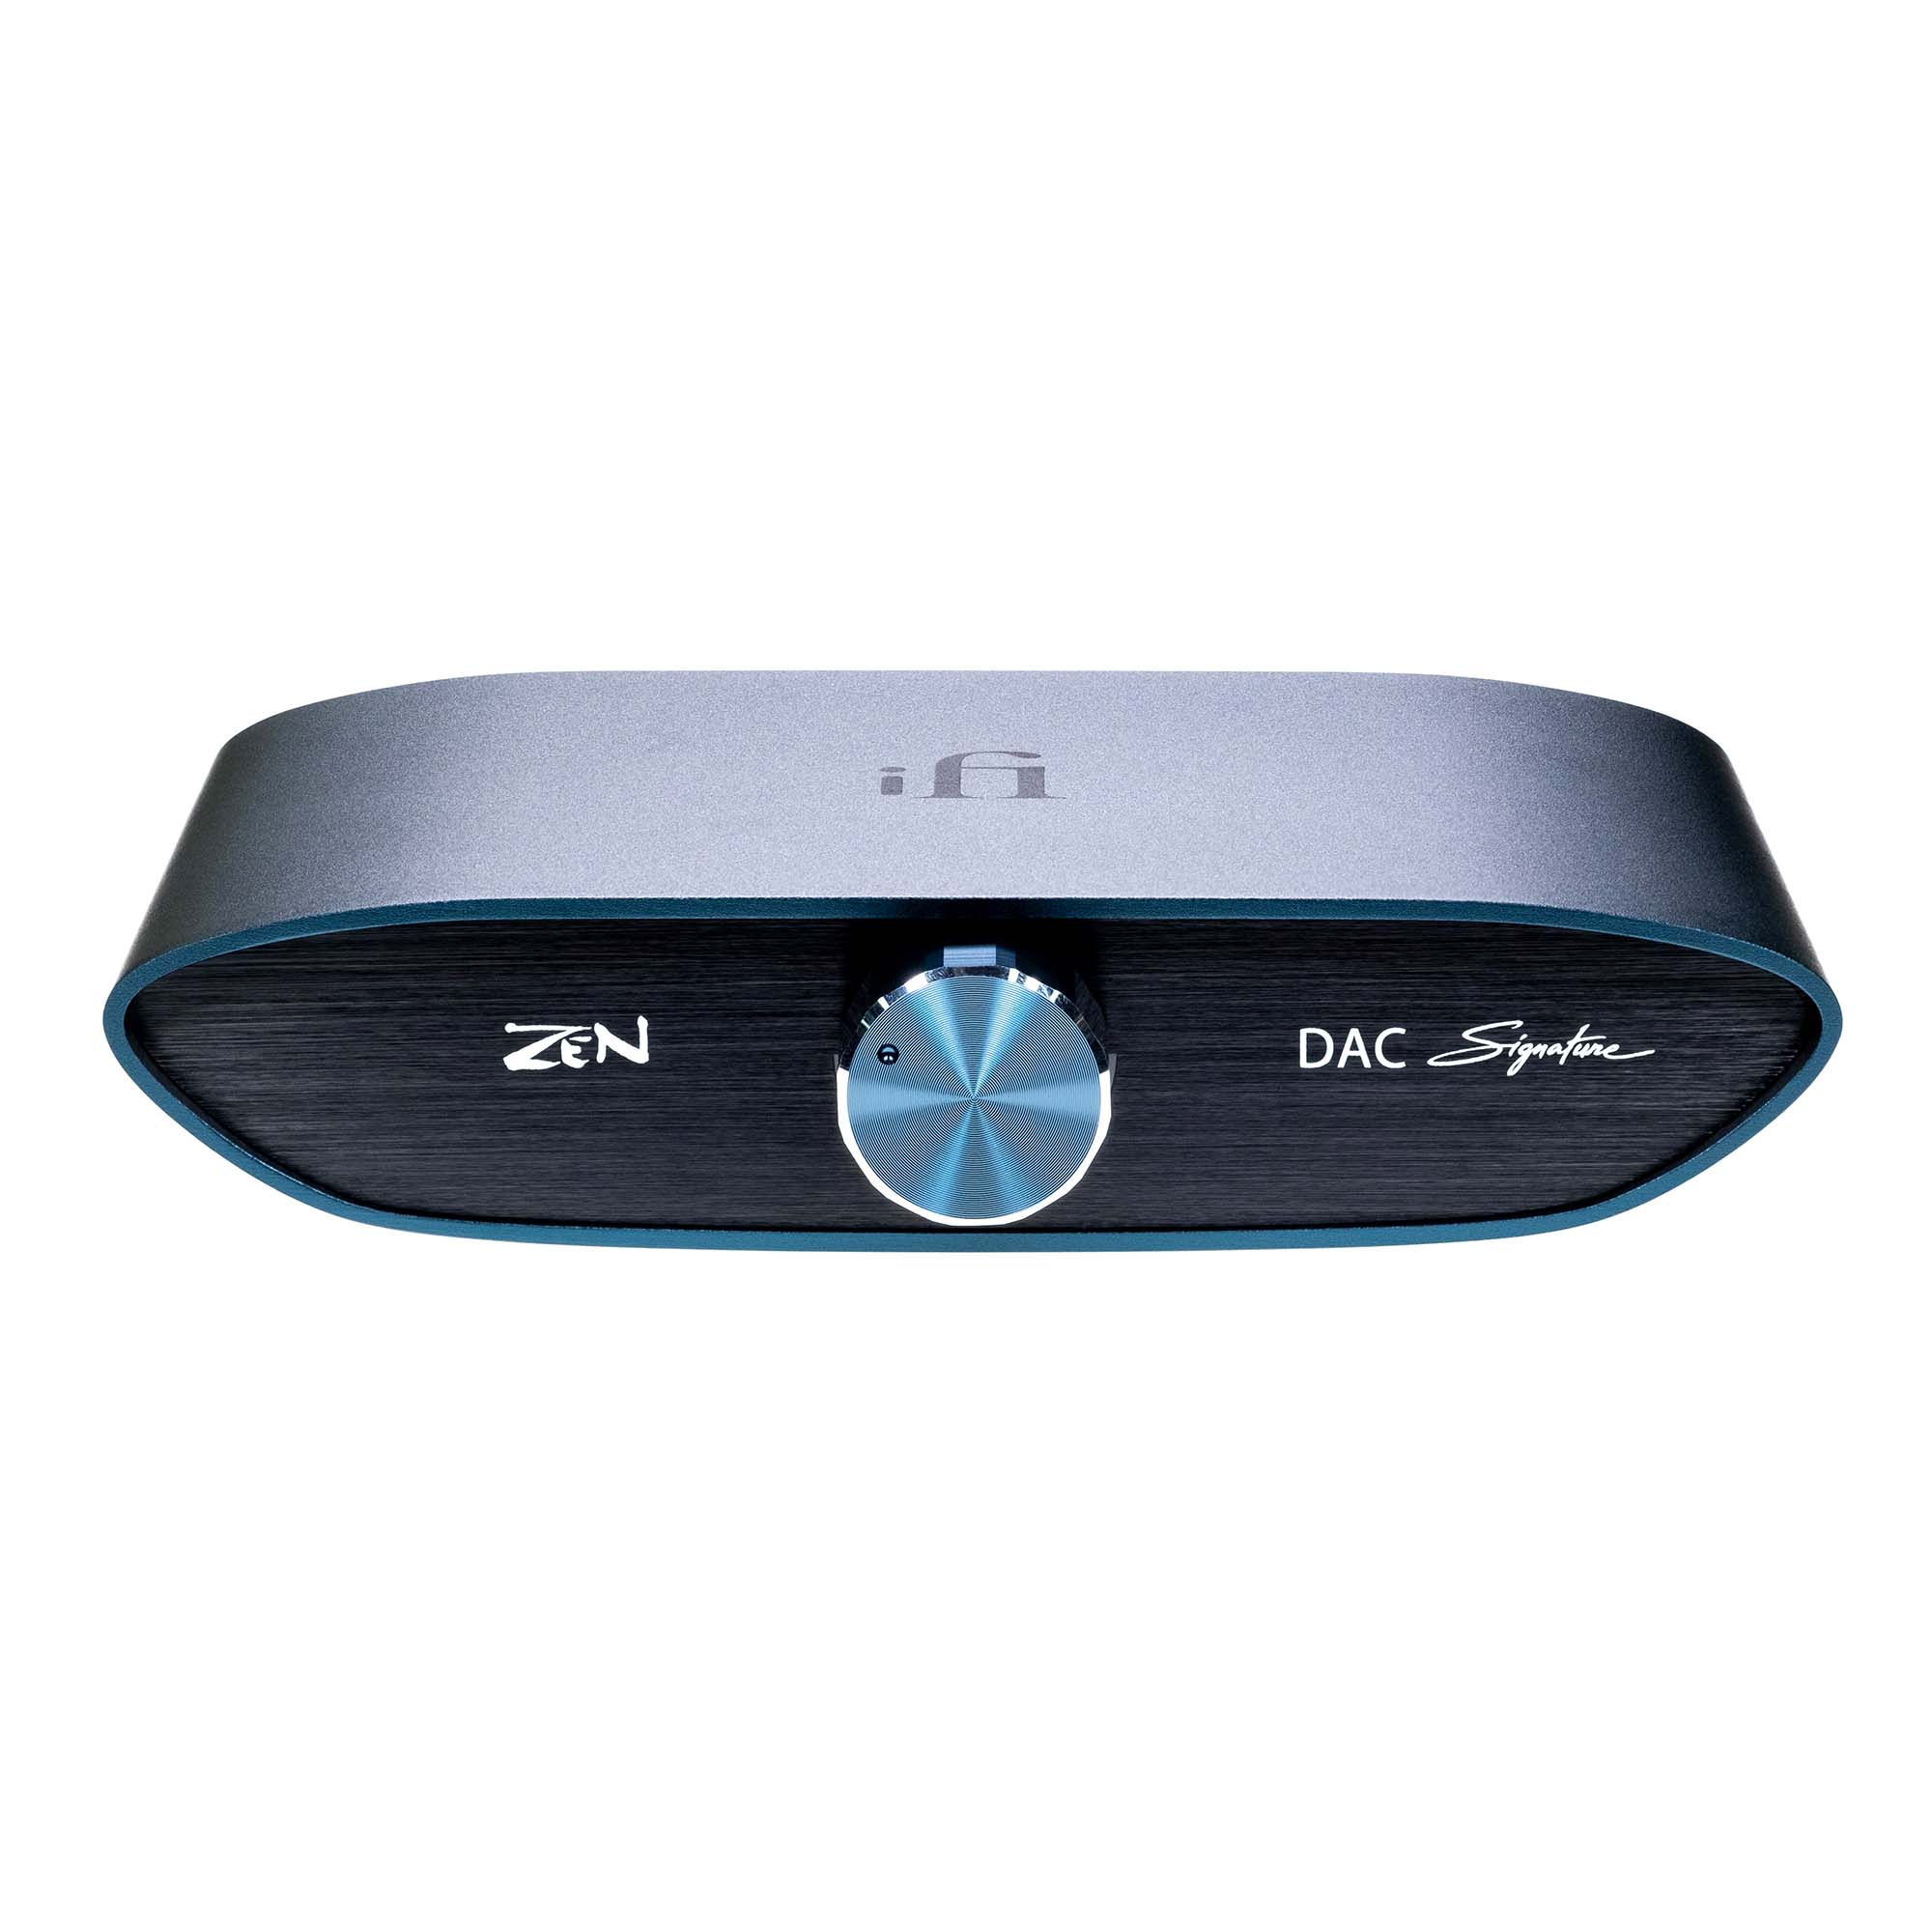 ZEN DAC by iFi audio - Super-affordable DAC/amp from iFi audio